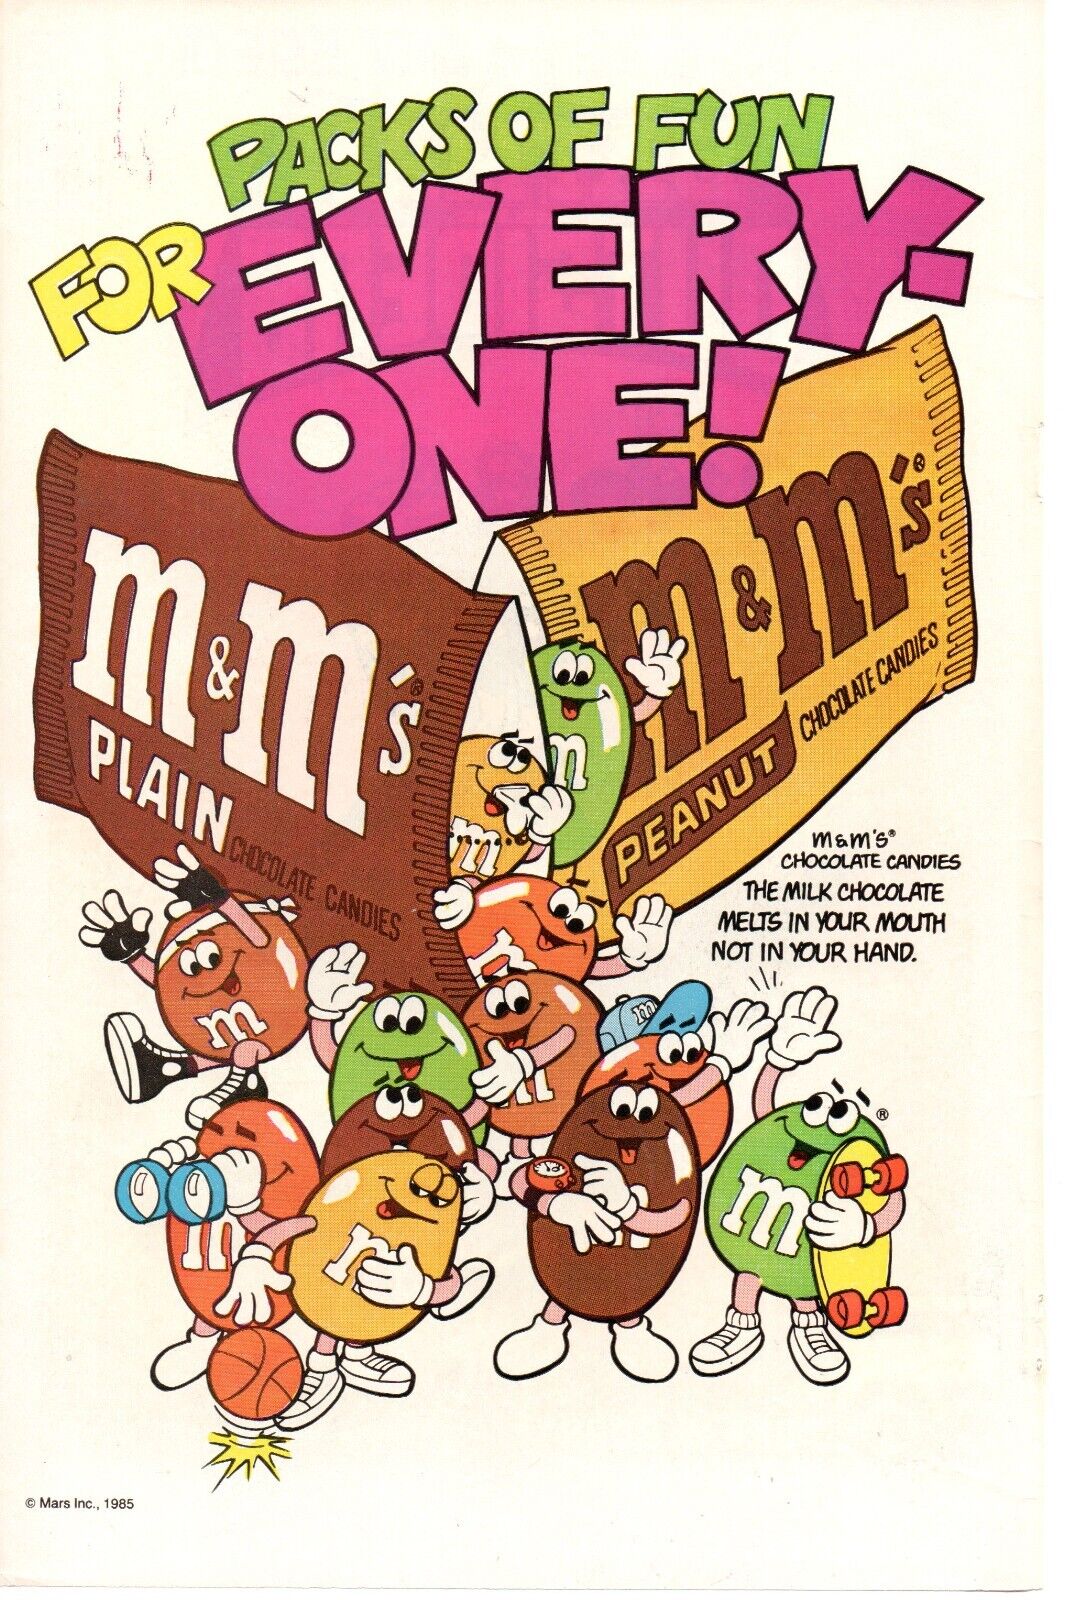 1985 M&M'S Plain, Peanut Candy Food Snack PRINT AD WALL ART - FUN FOR EVERYONE